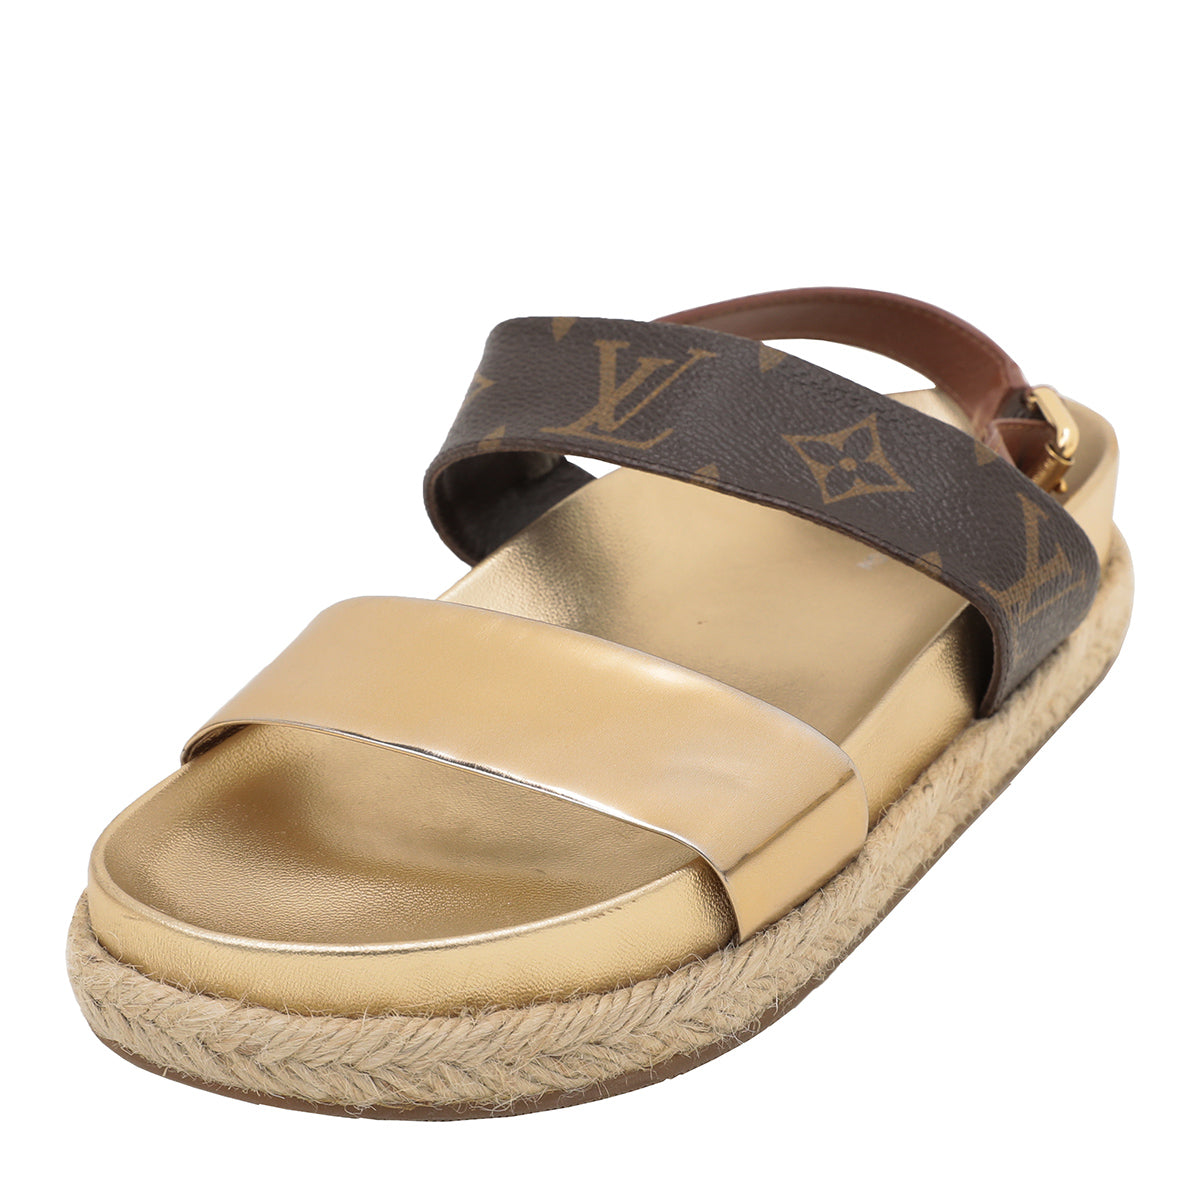 Leather sandals Louis Vuitton Gold size 40 EU in Leather - 31741509